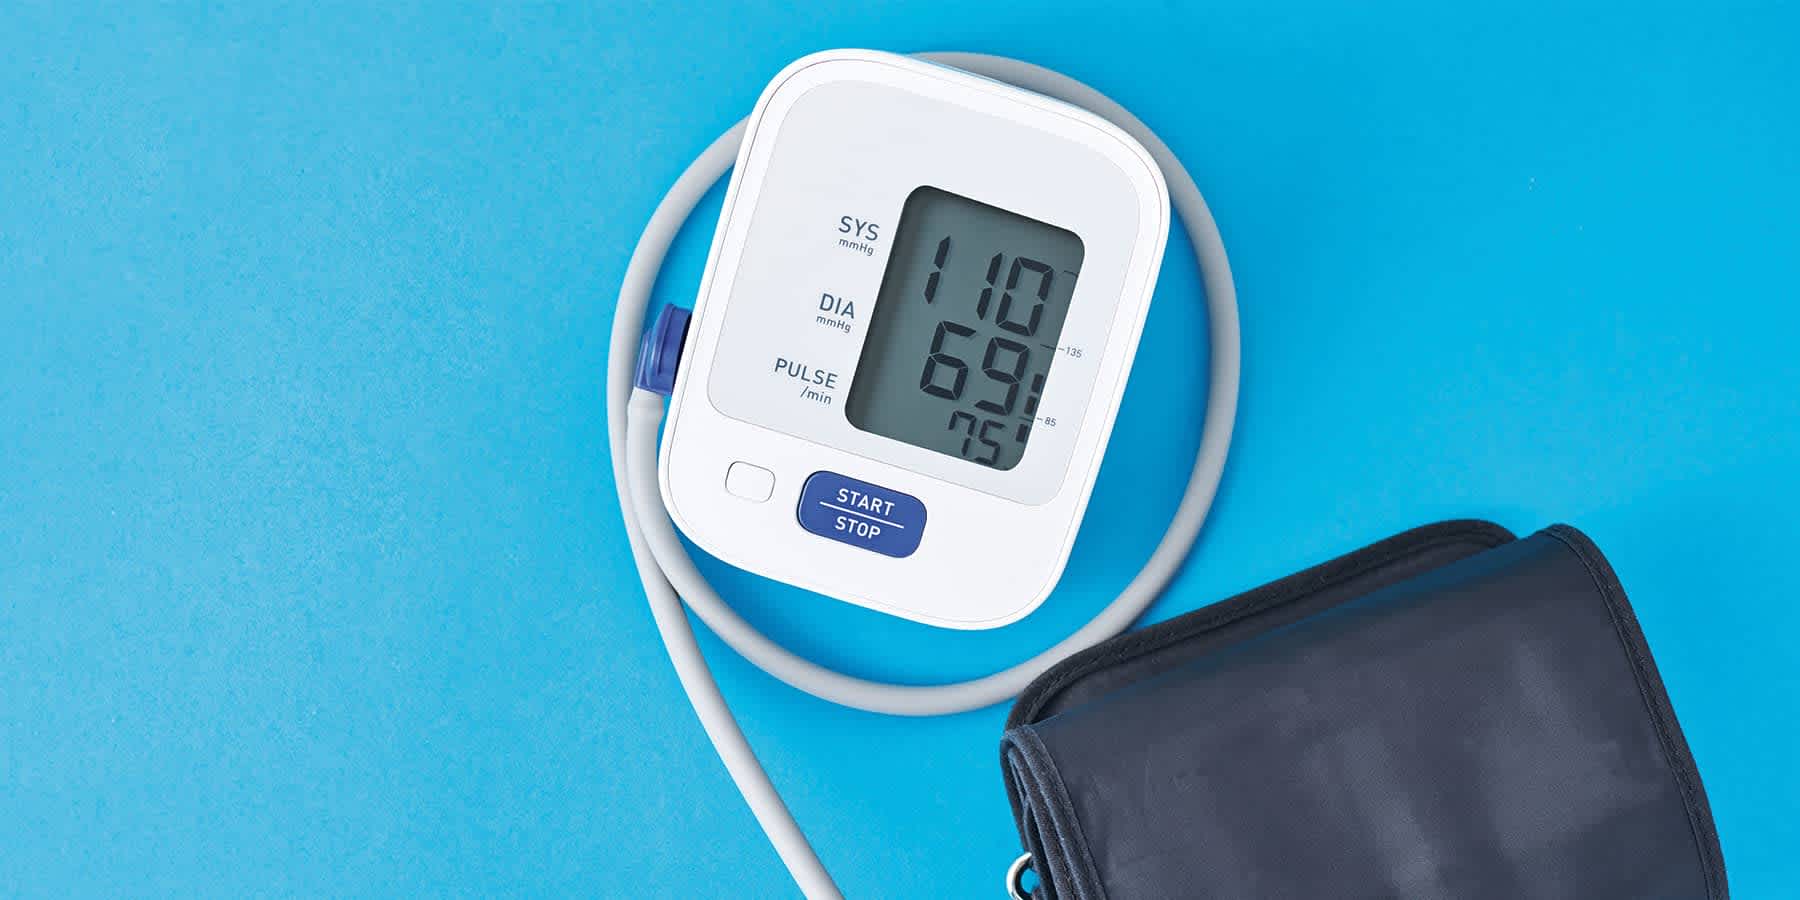 Blood pressure monitoring device against a blue background